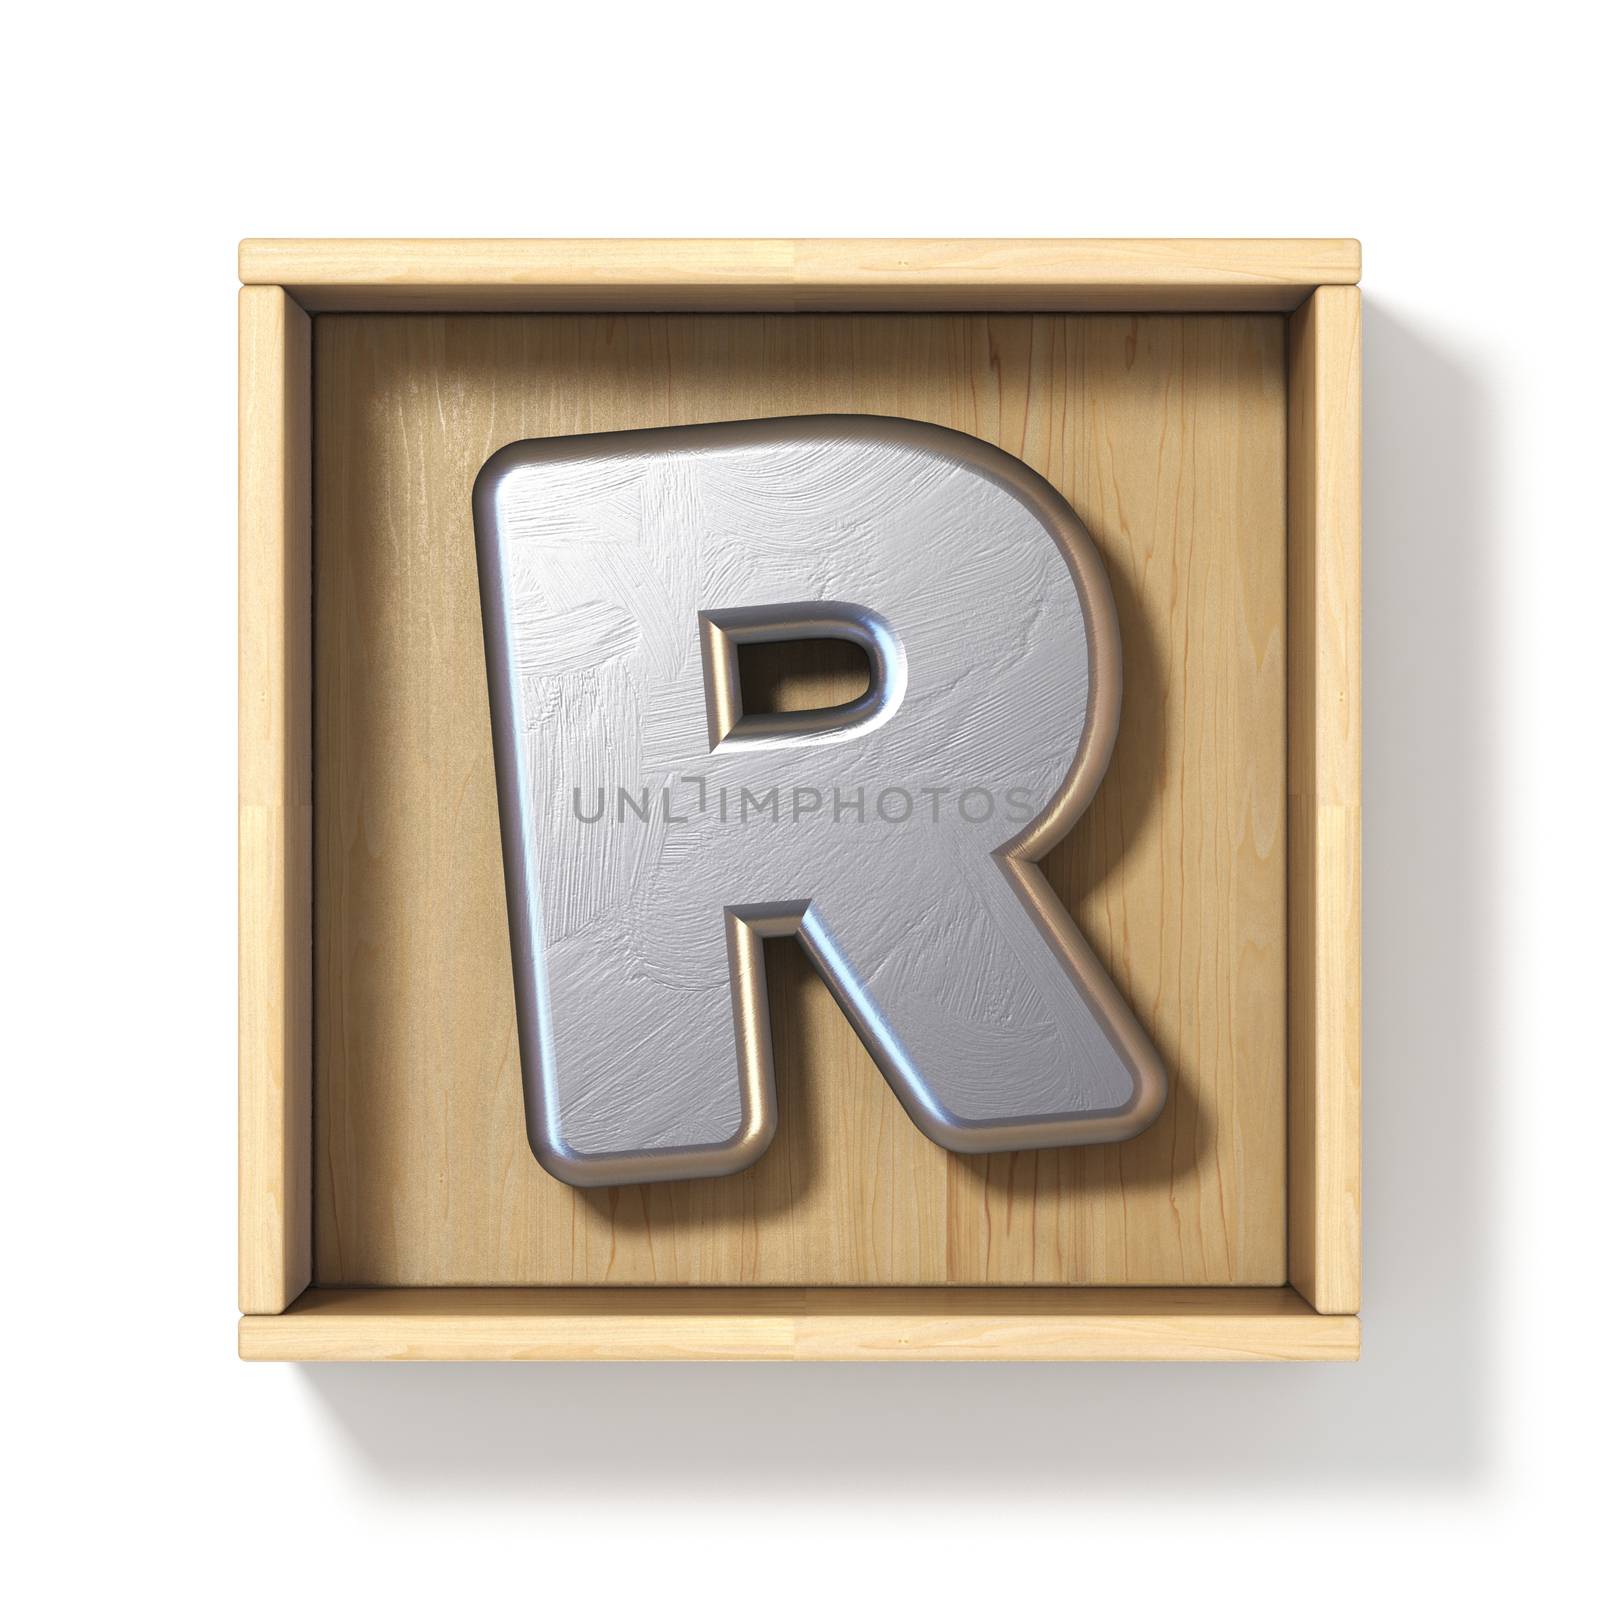 Silver metal letter R in wooden box 3D render illustration isolated on white background